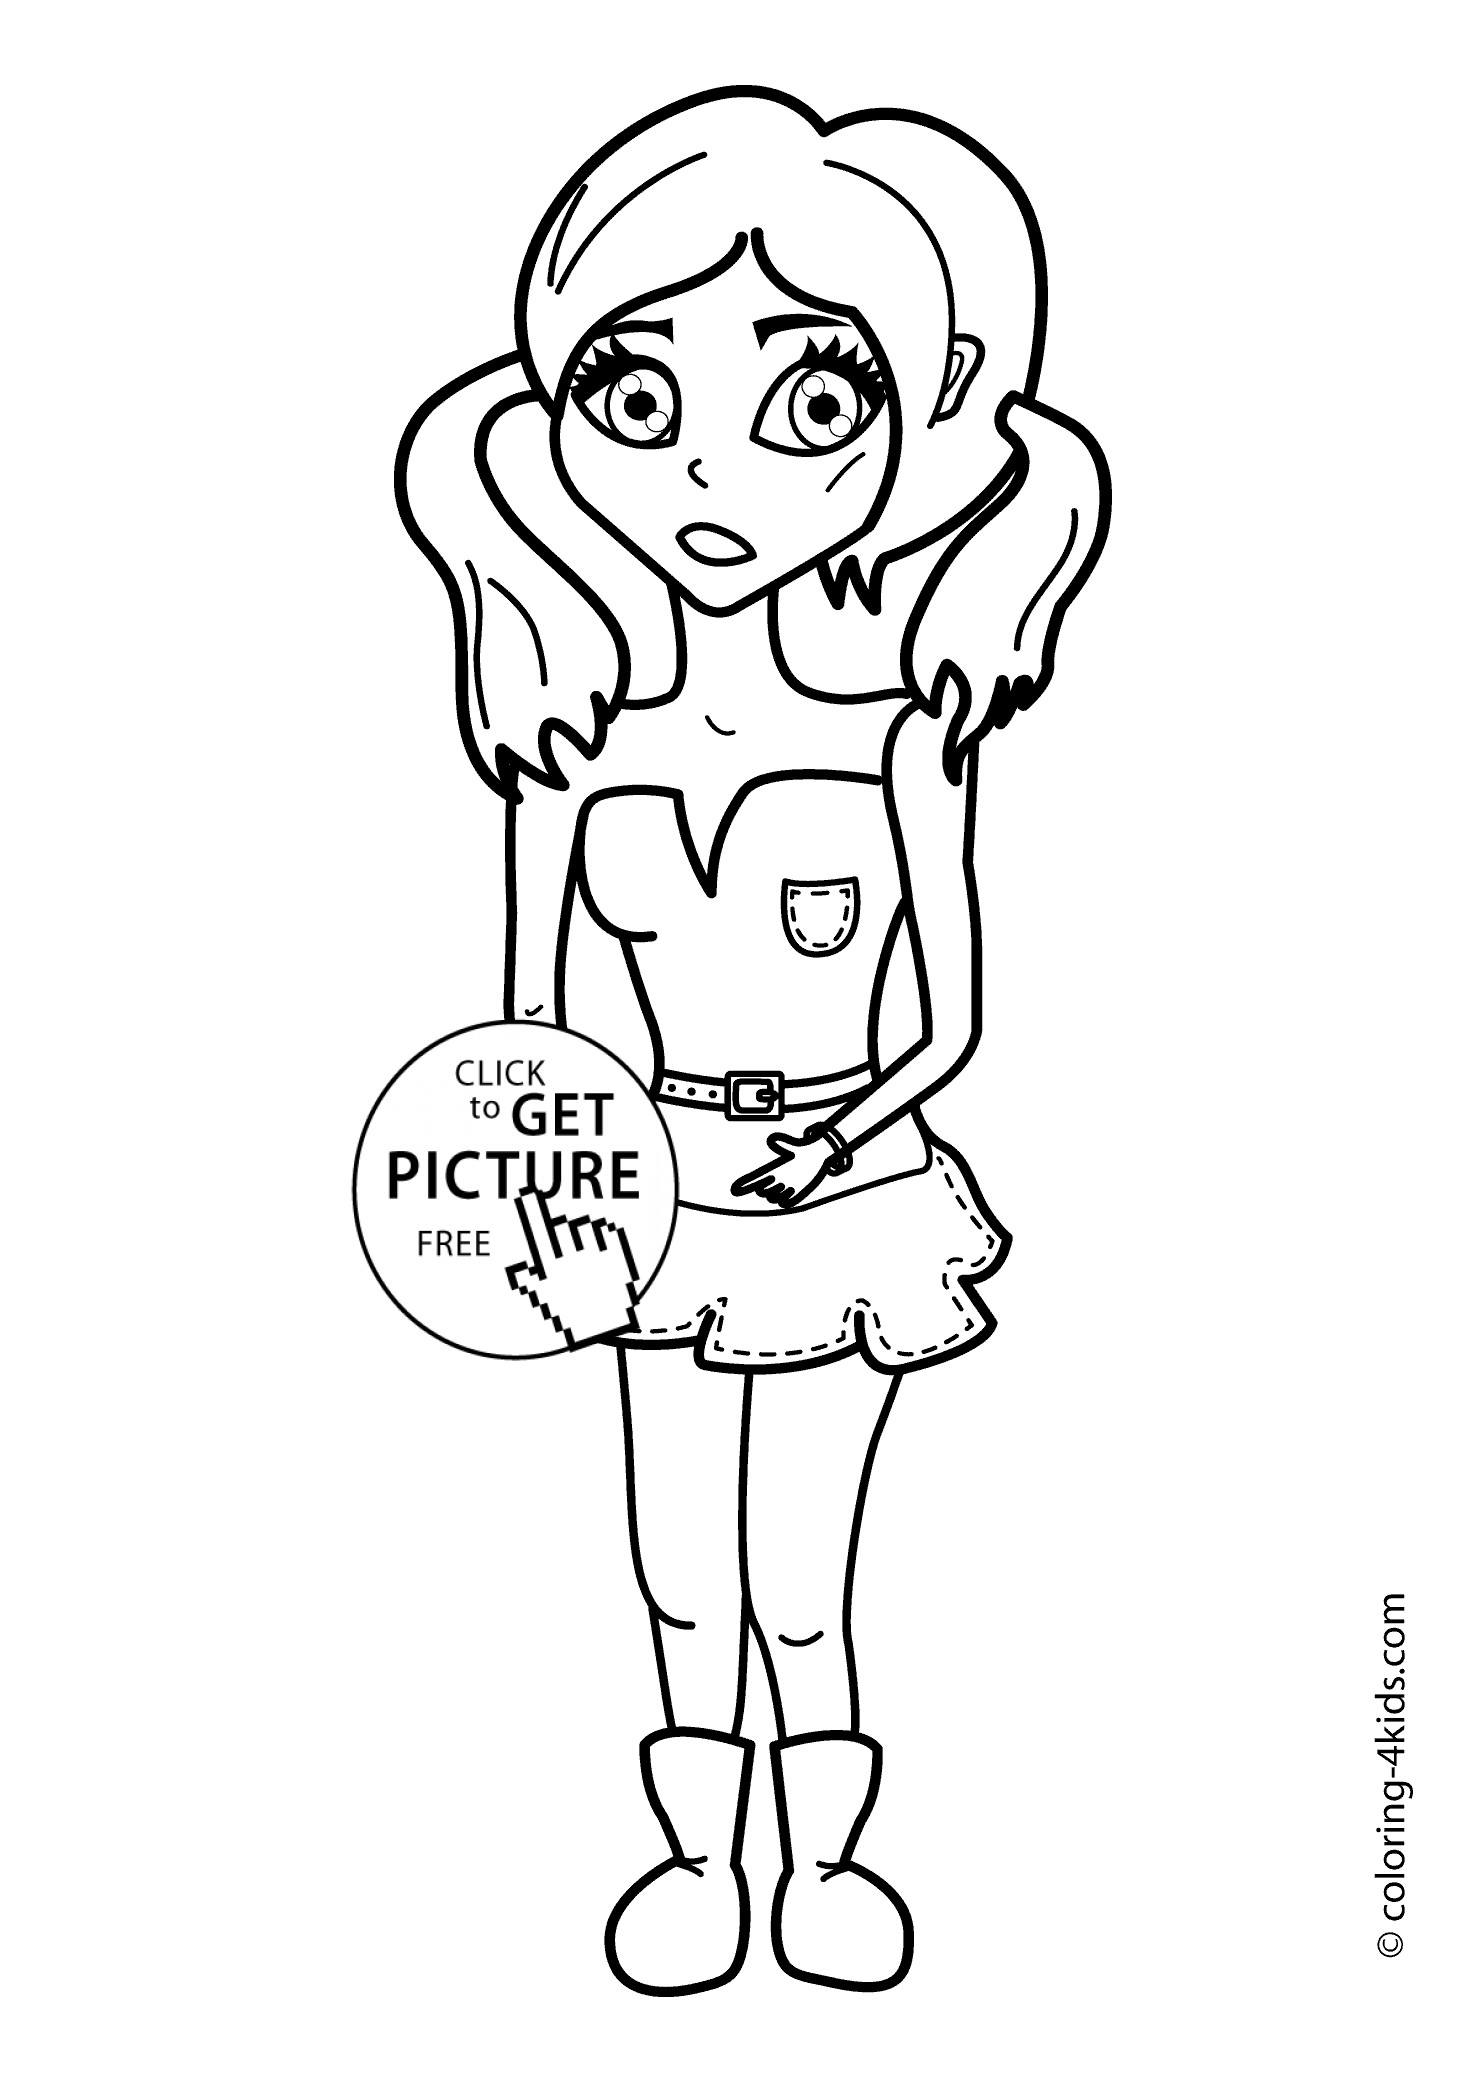 Online Printable Coloring Pages For Girls
 Cute coloring pages for girls printable coloring pages